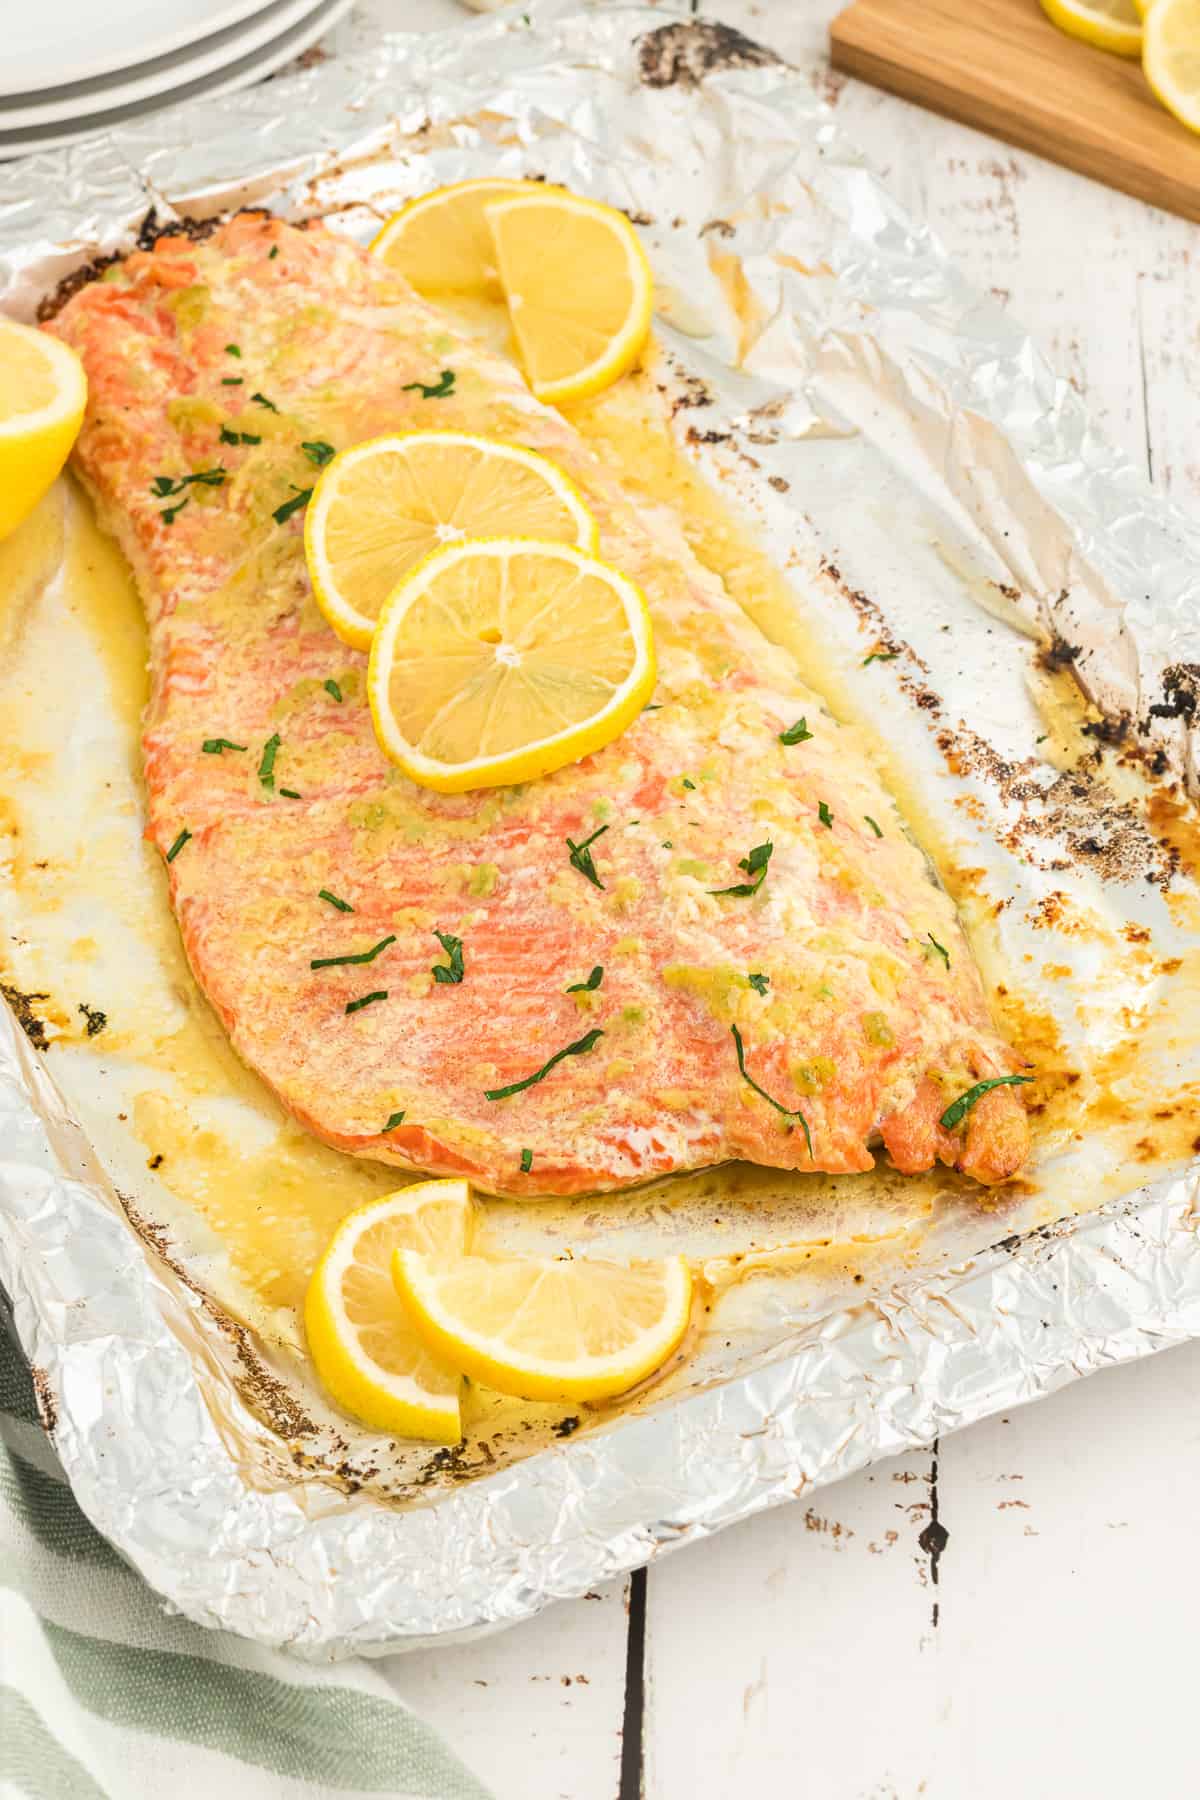 A large salmon fillet on foil topped with a garlic butter sauce and lemon slices.